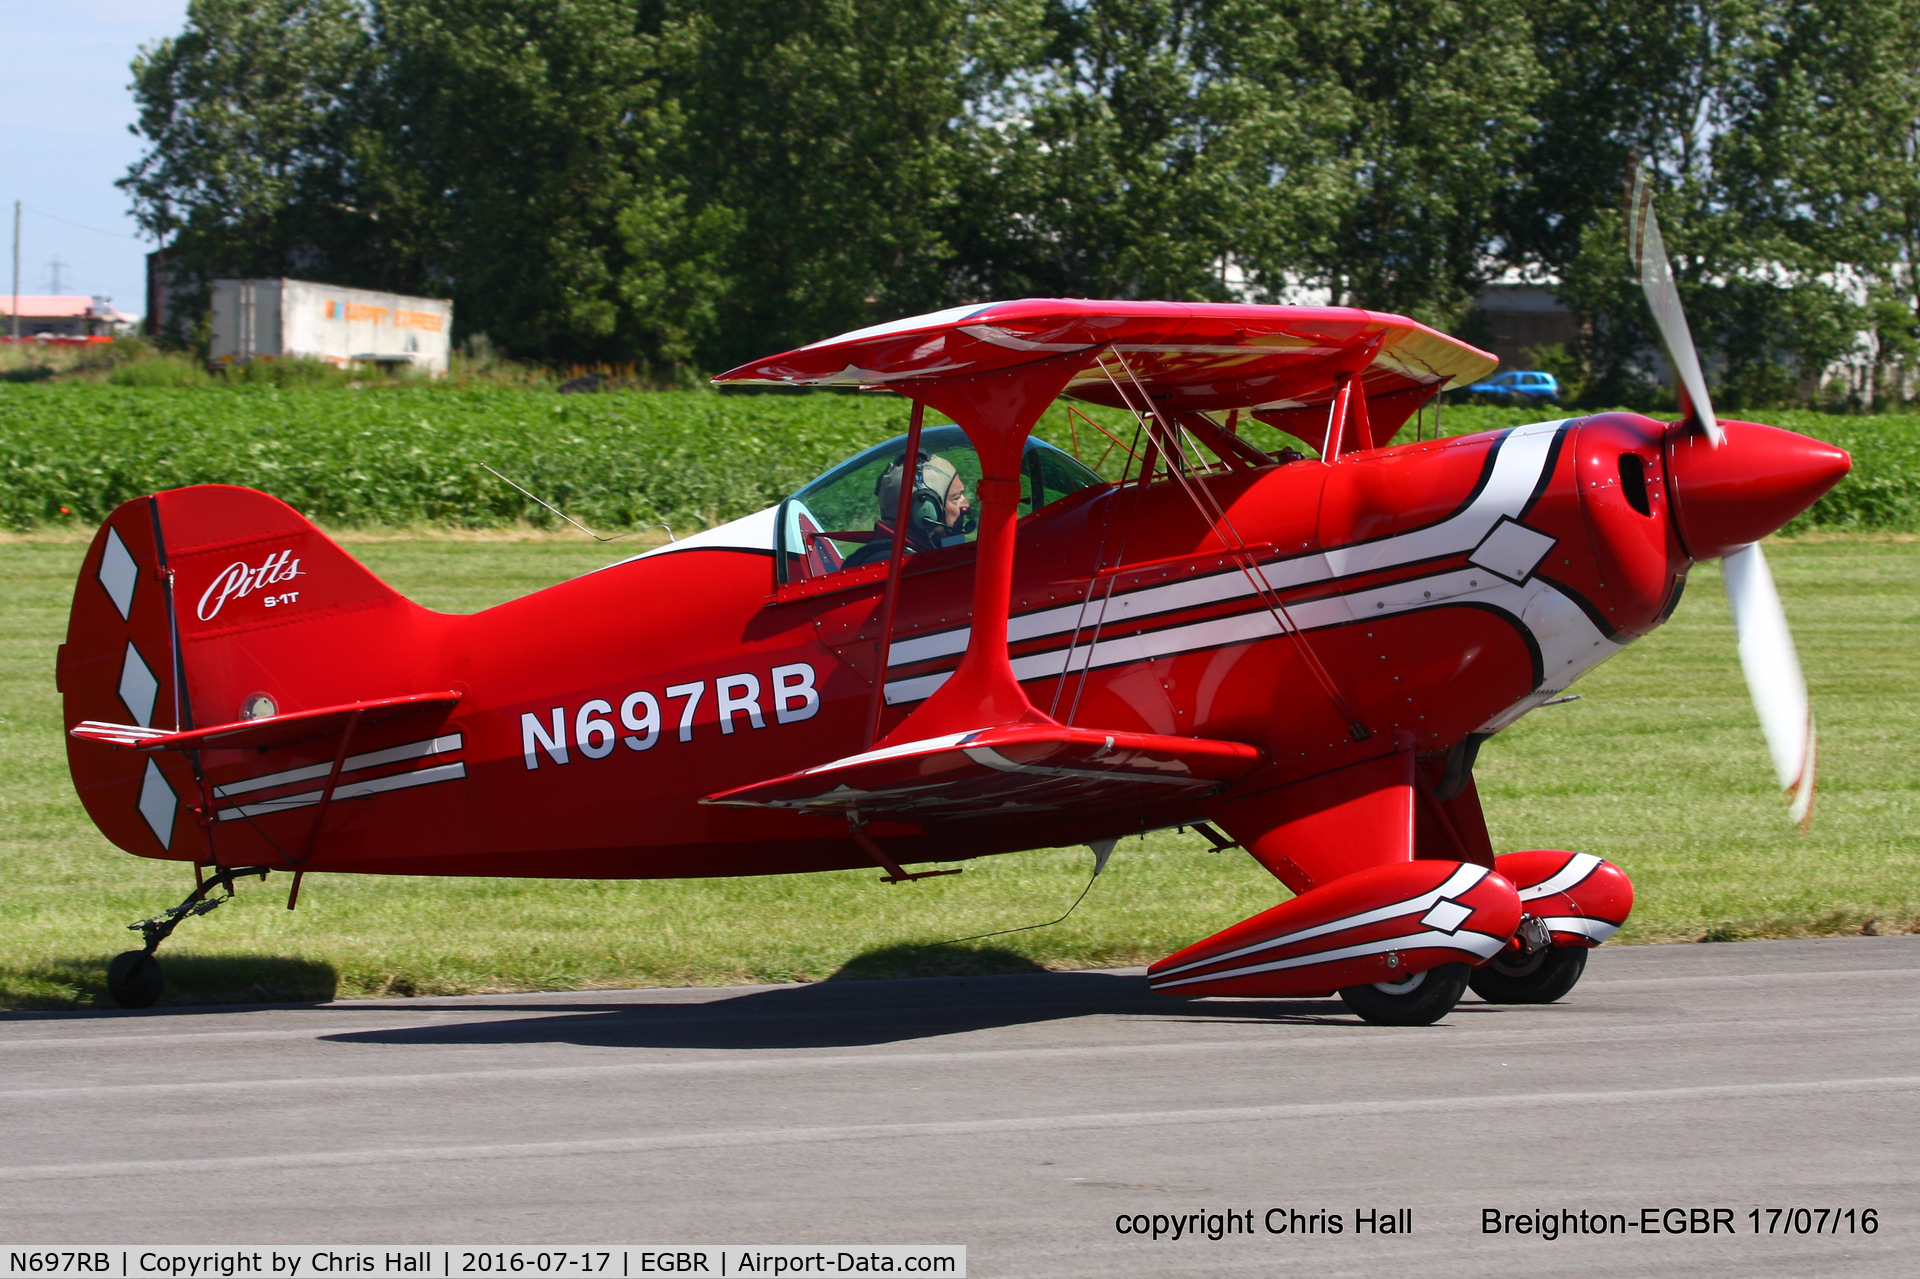 N697RB, 1986 Pitts S-1T Special C/N 1042, at Breighton's Summer Fly-in